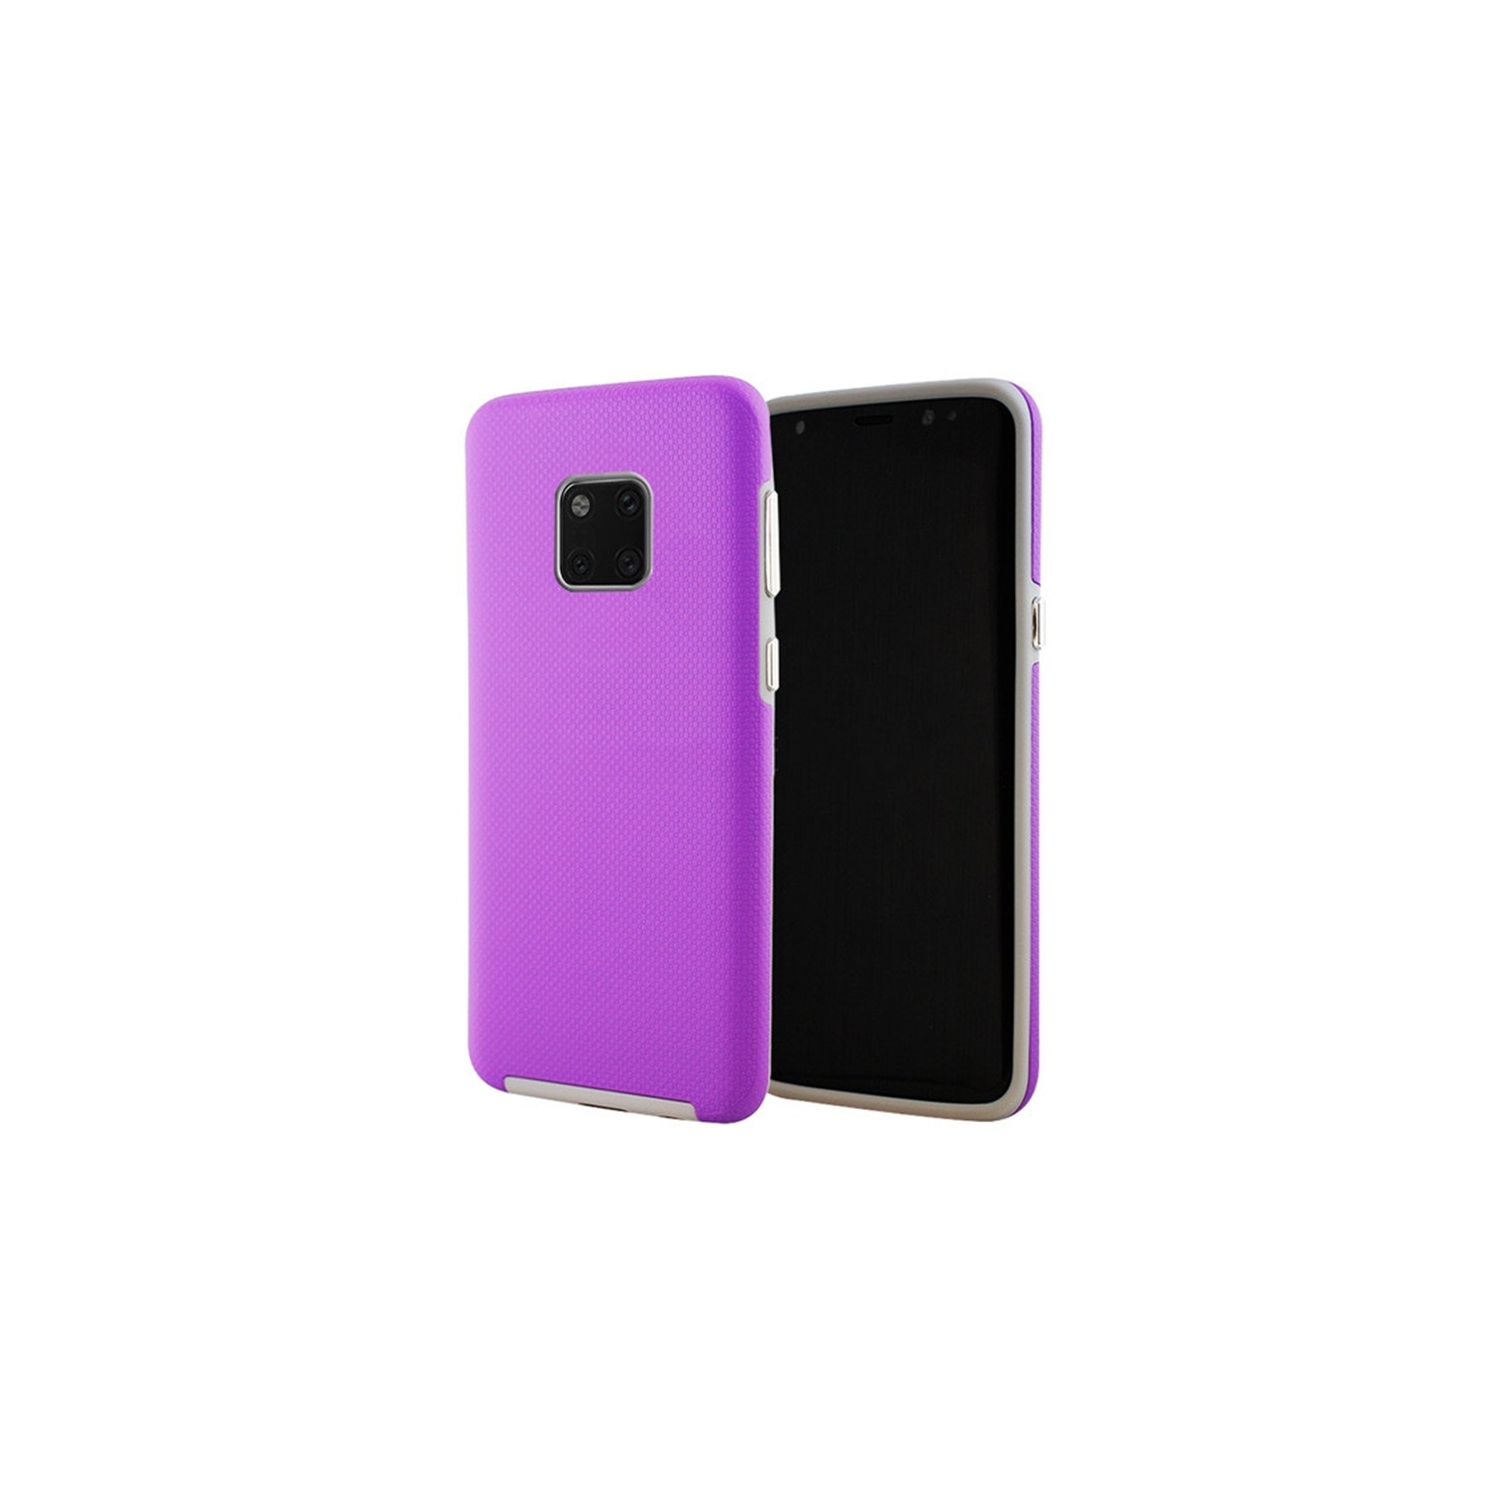 【CSmart】 Slim Fitted Hybrid Hard PC Shell Shockproof Scratch Resistant Case Cover for Huawei Mate 20 Pro, Purple